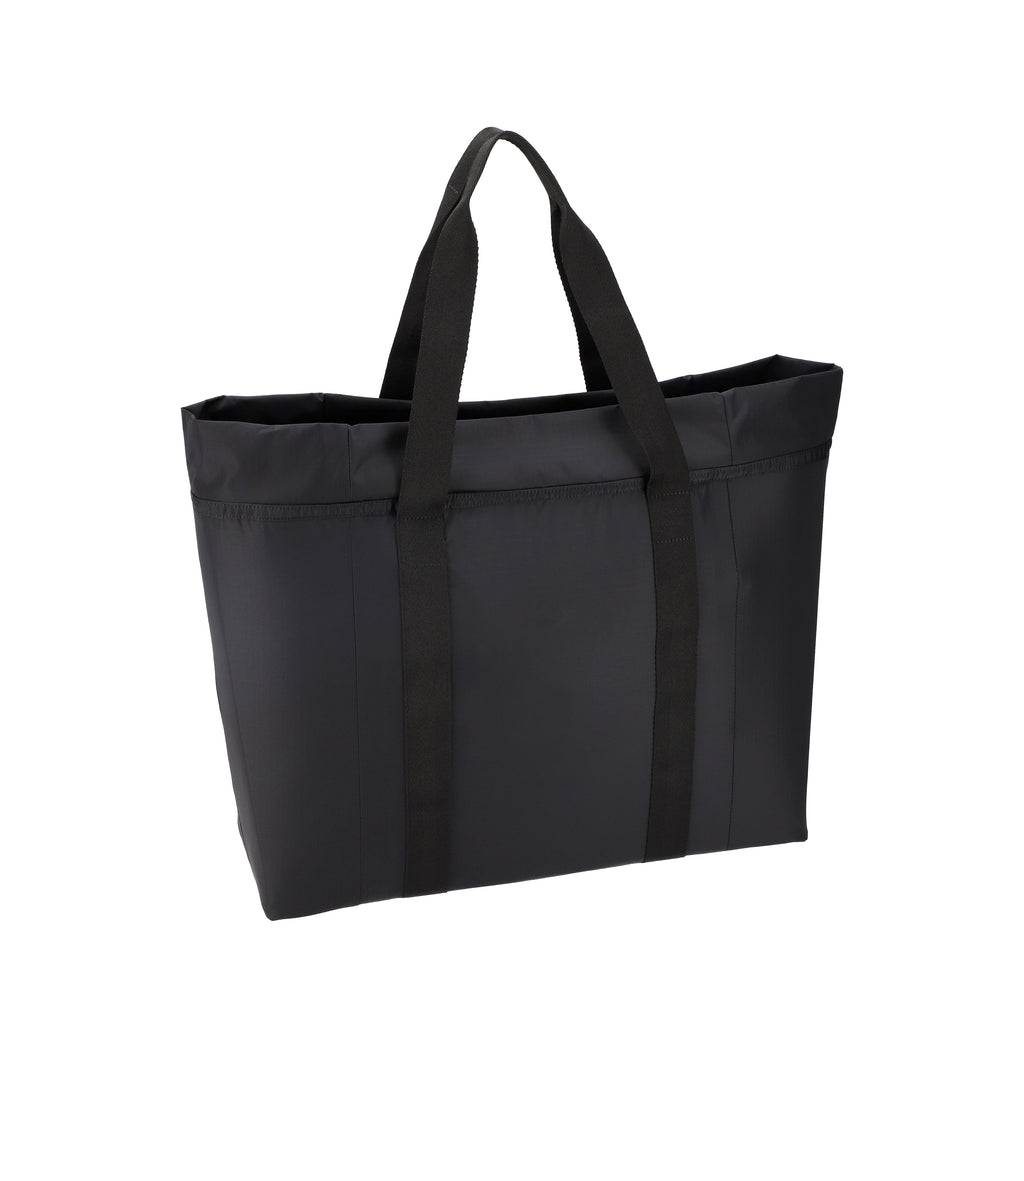 East/West Foldable Tote - Black solid – LeSportsac